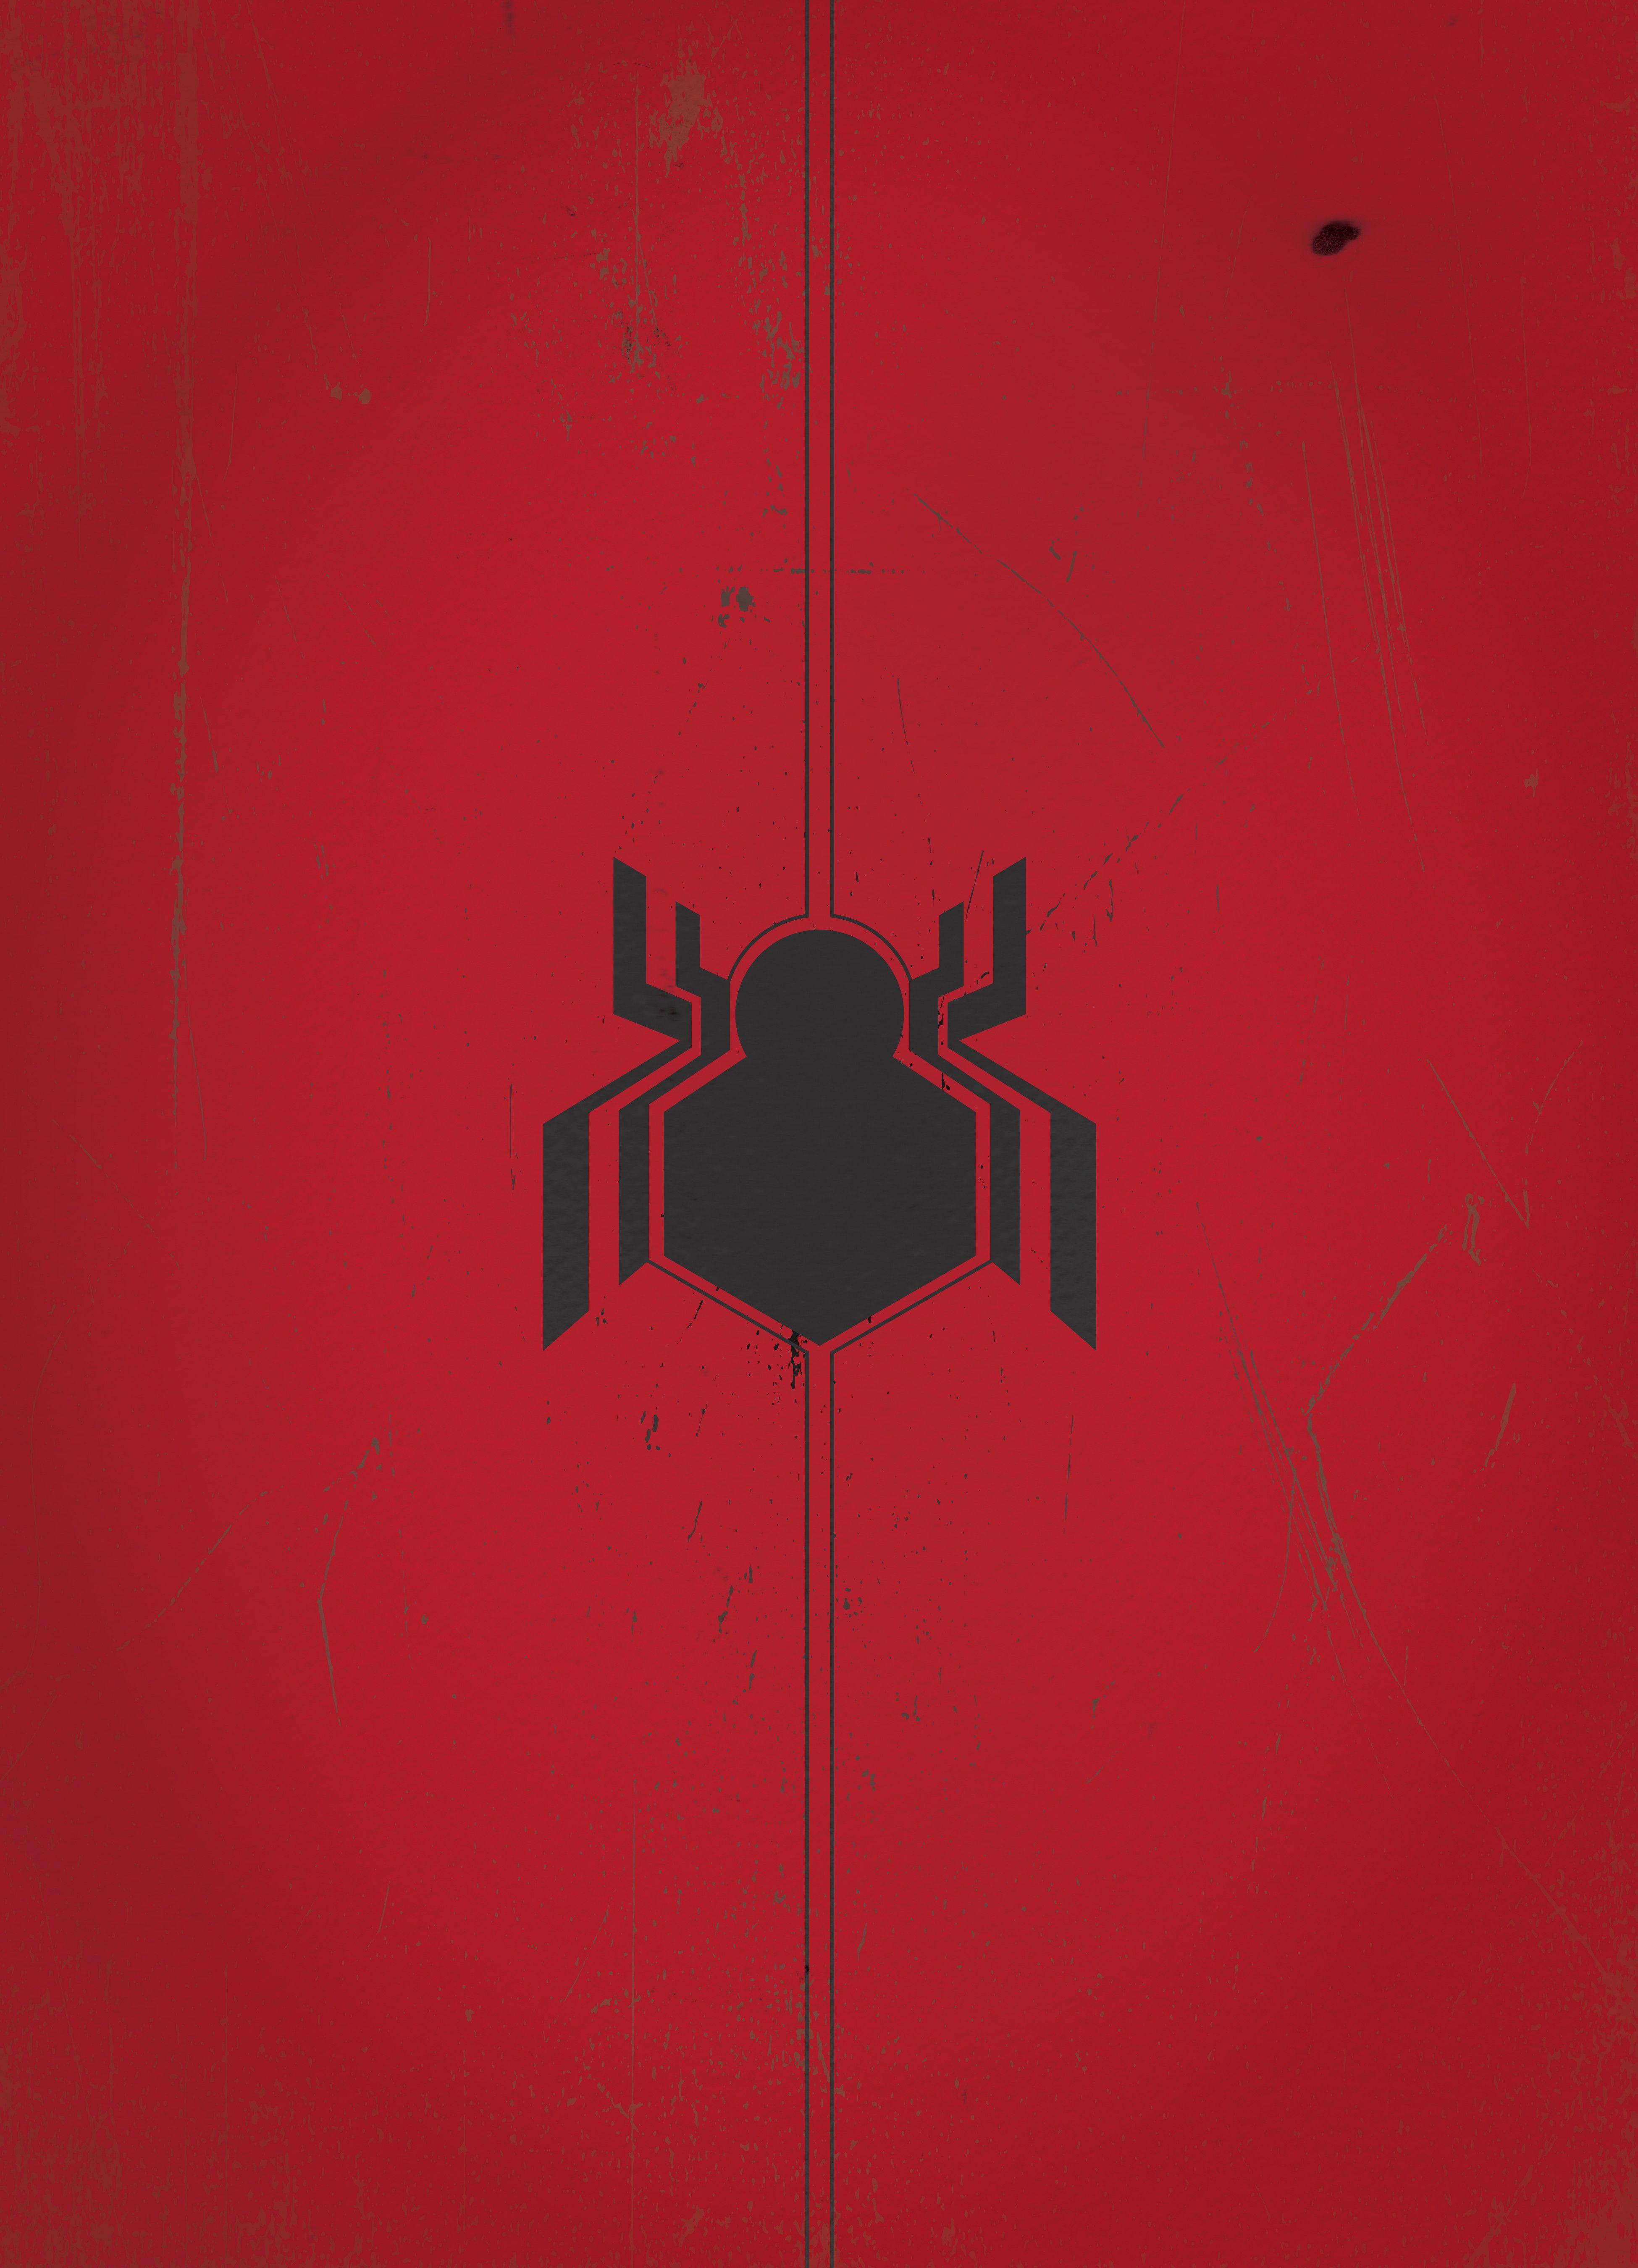 Spider-Man Logo - I went about recreating the new Spider-Man logo from Civil War ...